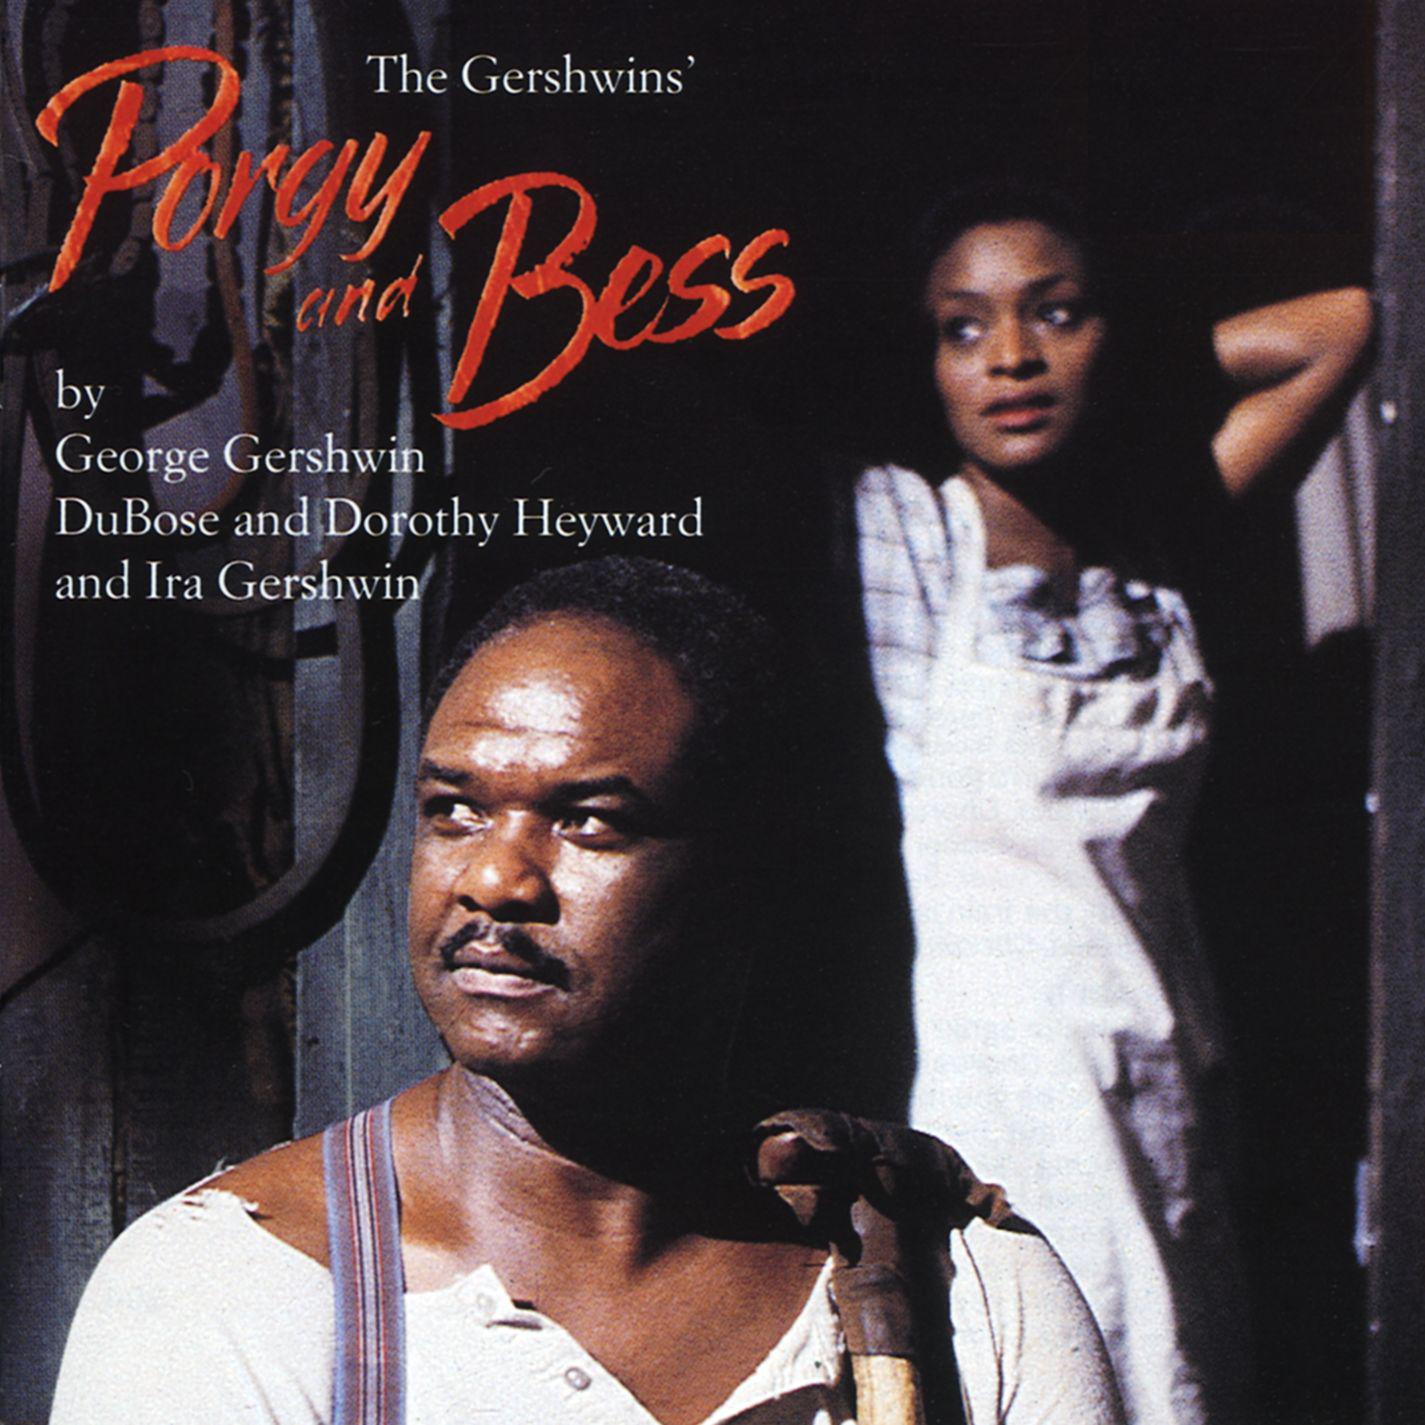 Glyndebourne Chorus - Porgy and Bess, Act 1, Scene 1:Introduction (Jasbo Brown, Chorus)